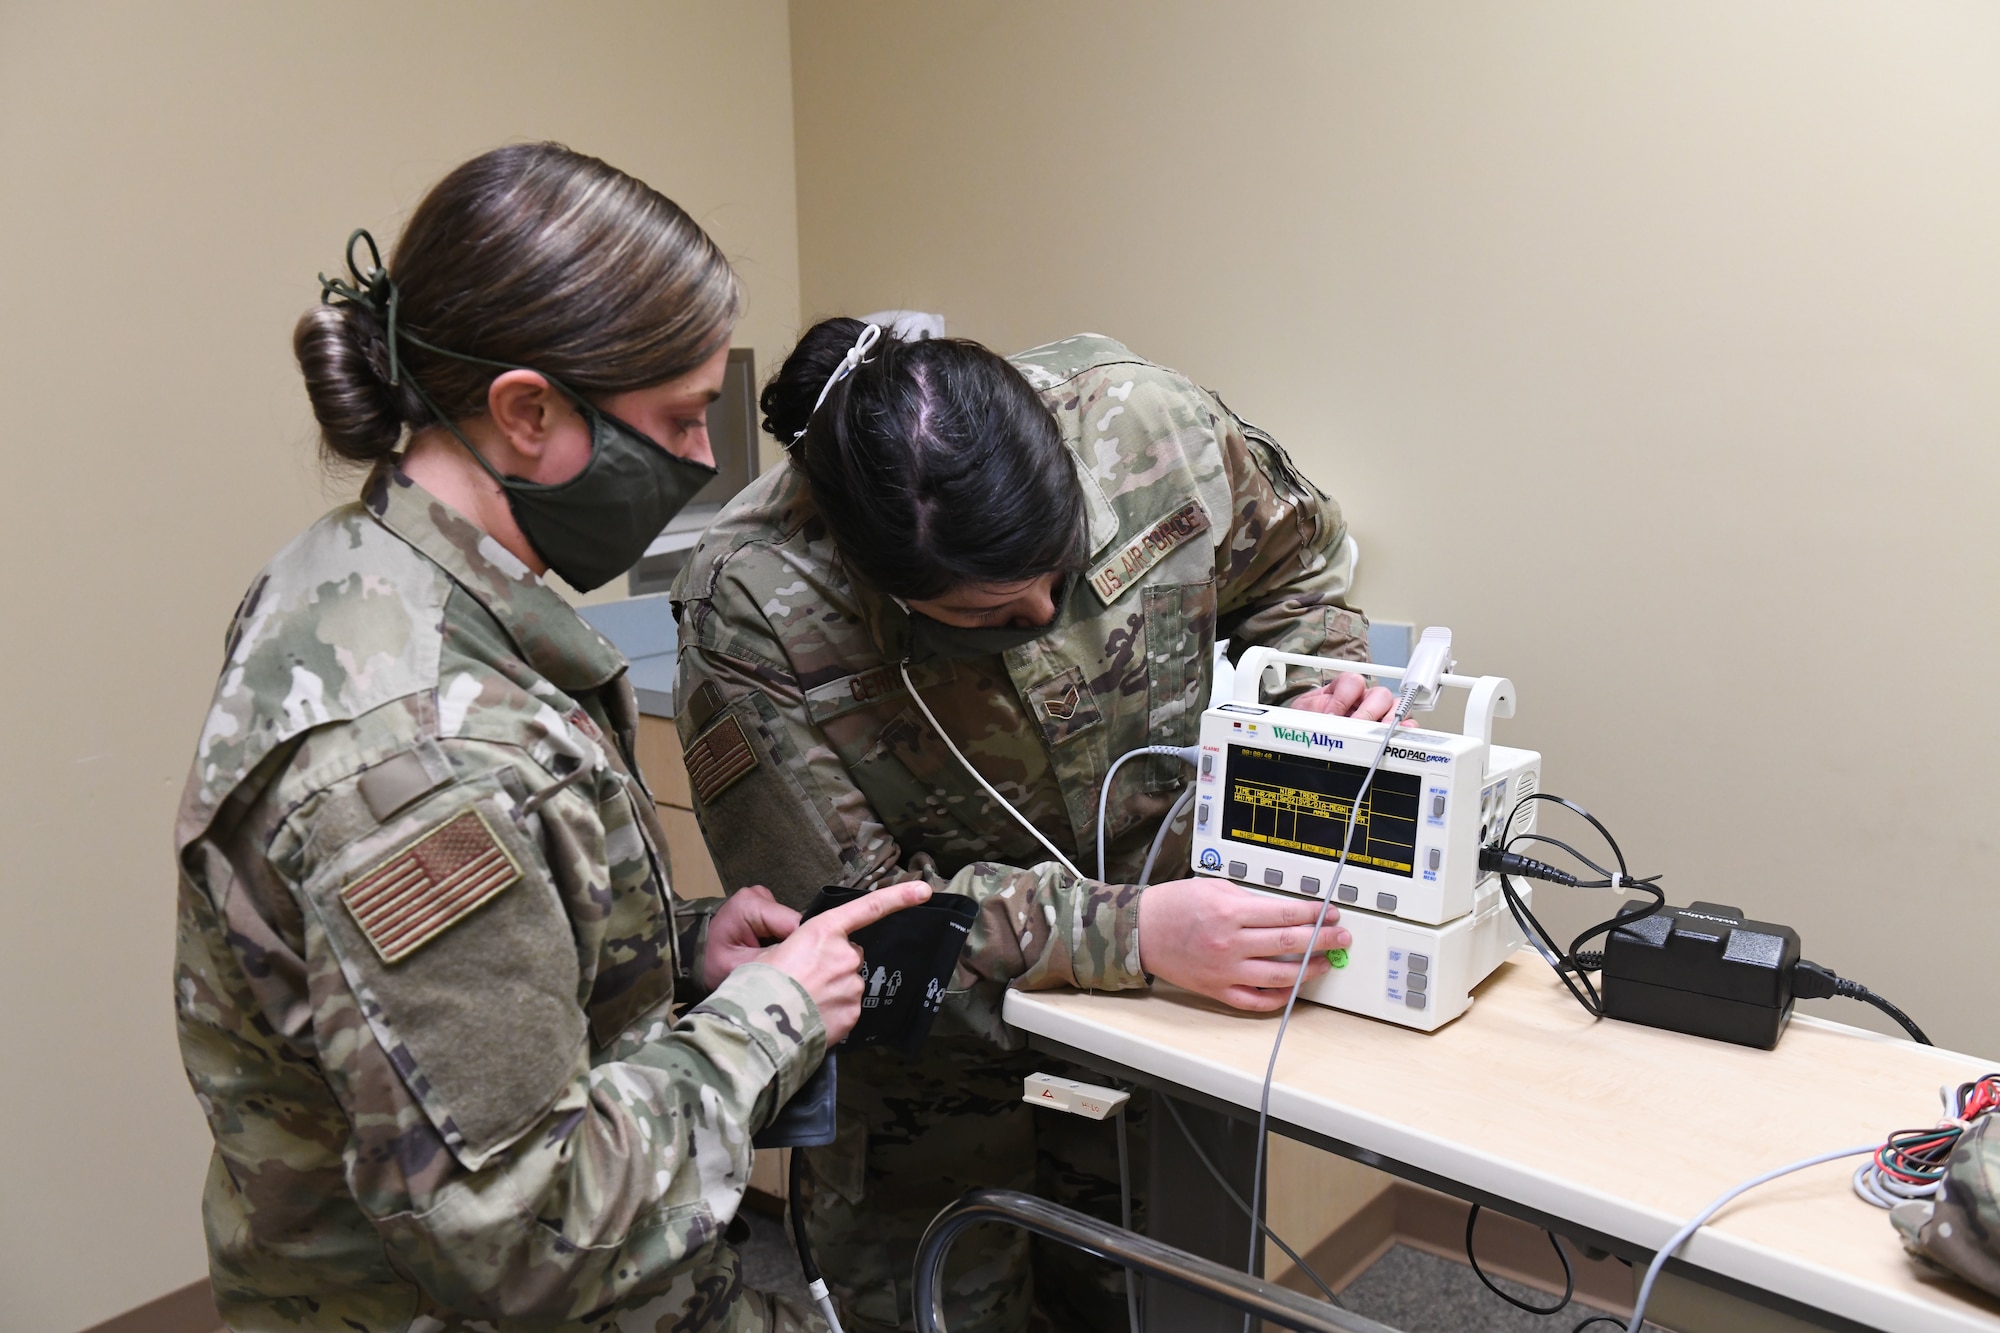 U.S. Air Force Senior Airman Marissa Cerra (right) practices checking an incoming patient for fever and abnormal health while conducting drills prior to accepting live patients, at the North Carolina National Guard Medical Support Shelter (MSS), Central North Carolina, April 29, 2020. The MSS is intended to act as an overflow shelter for hospital patients not infected with the COVID-19 virus and is maned by a joint task force of Army and Airforce National Guard medical staff.